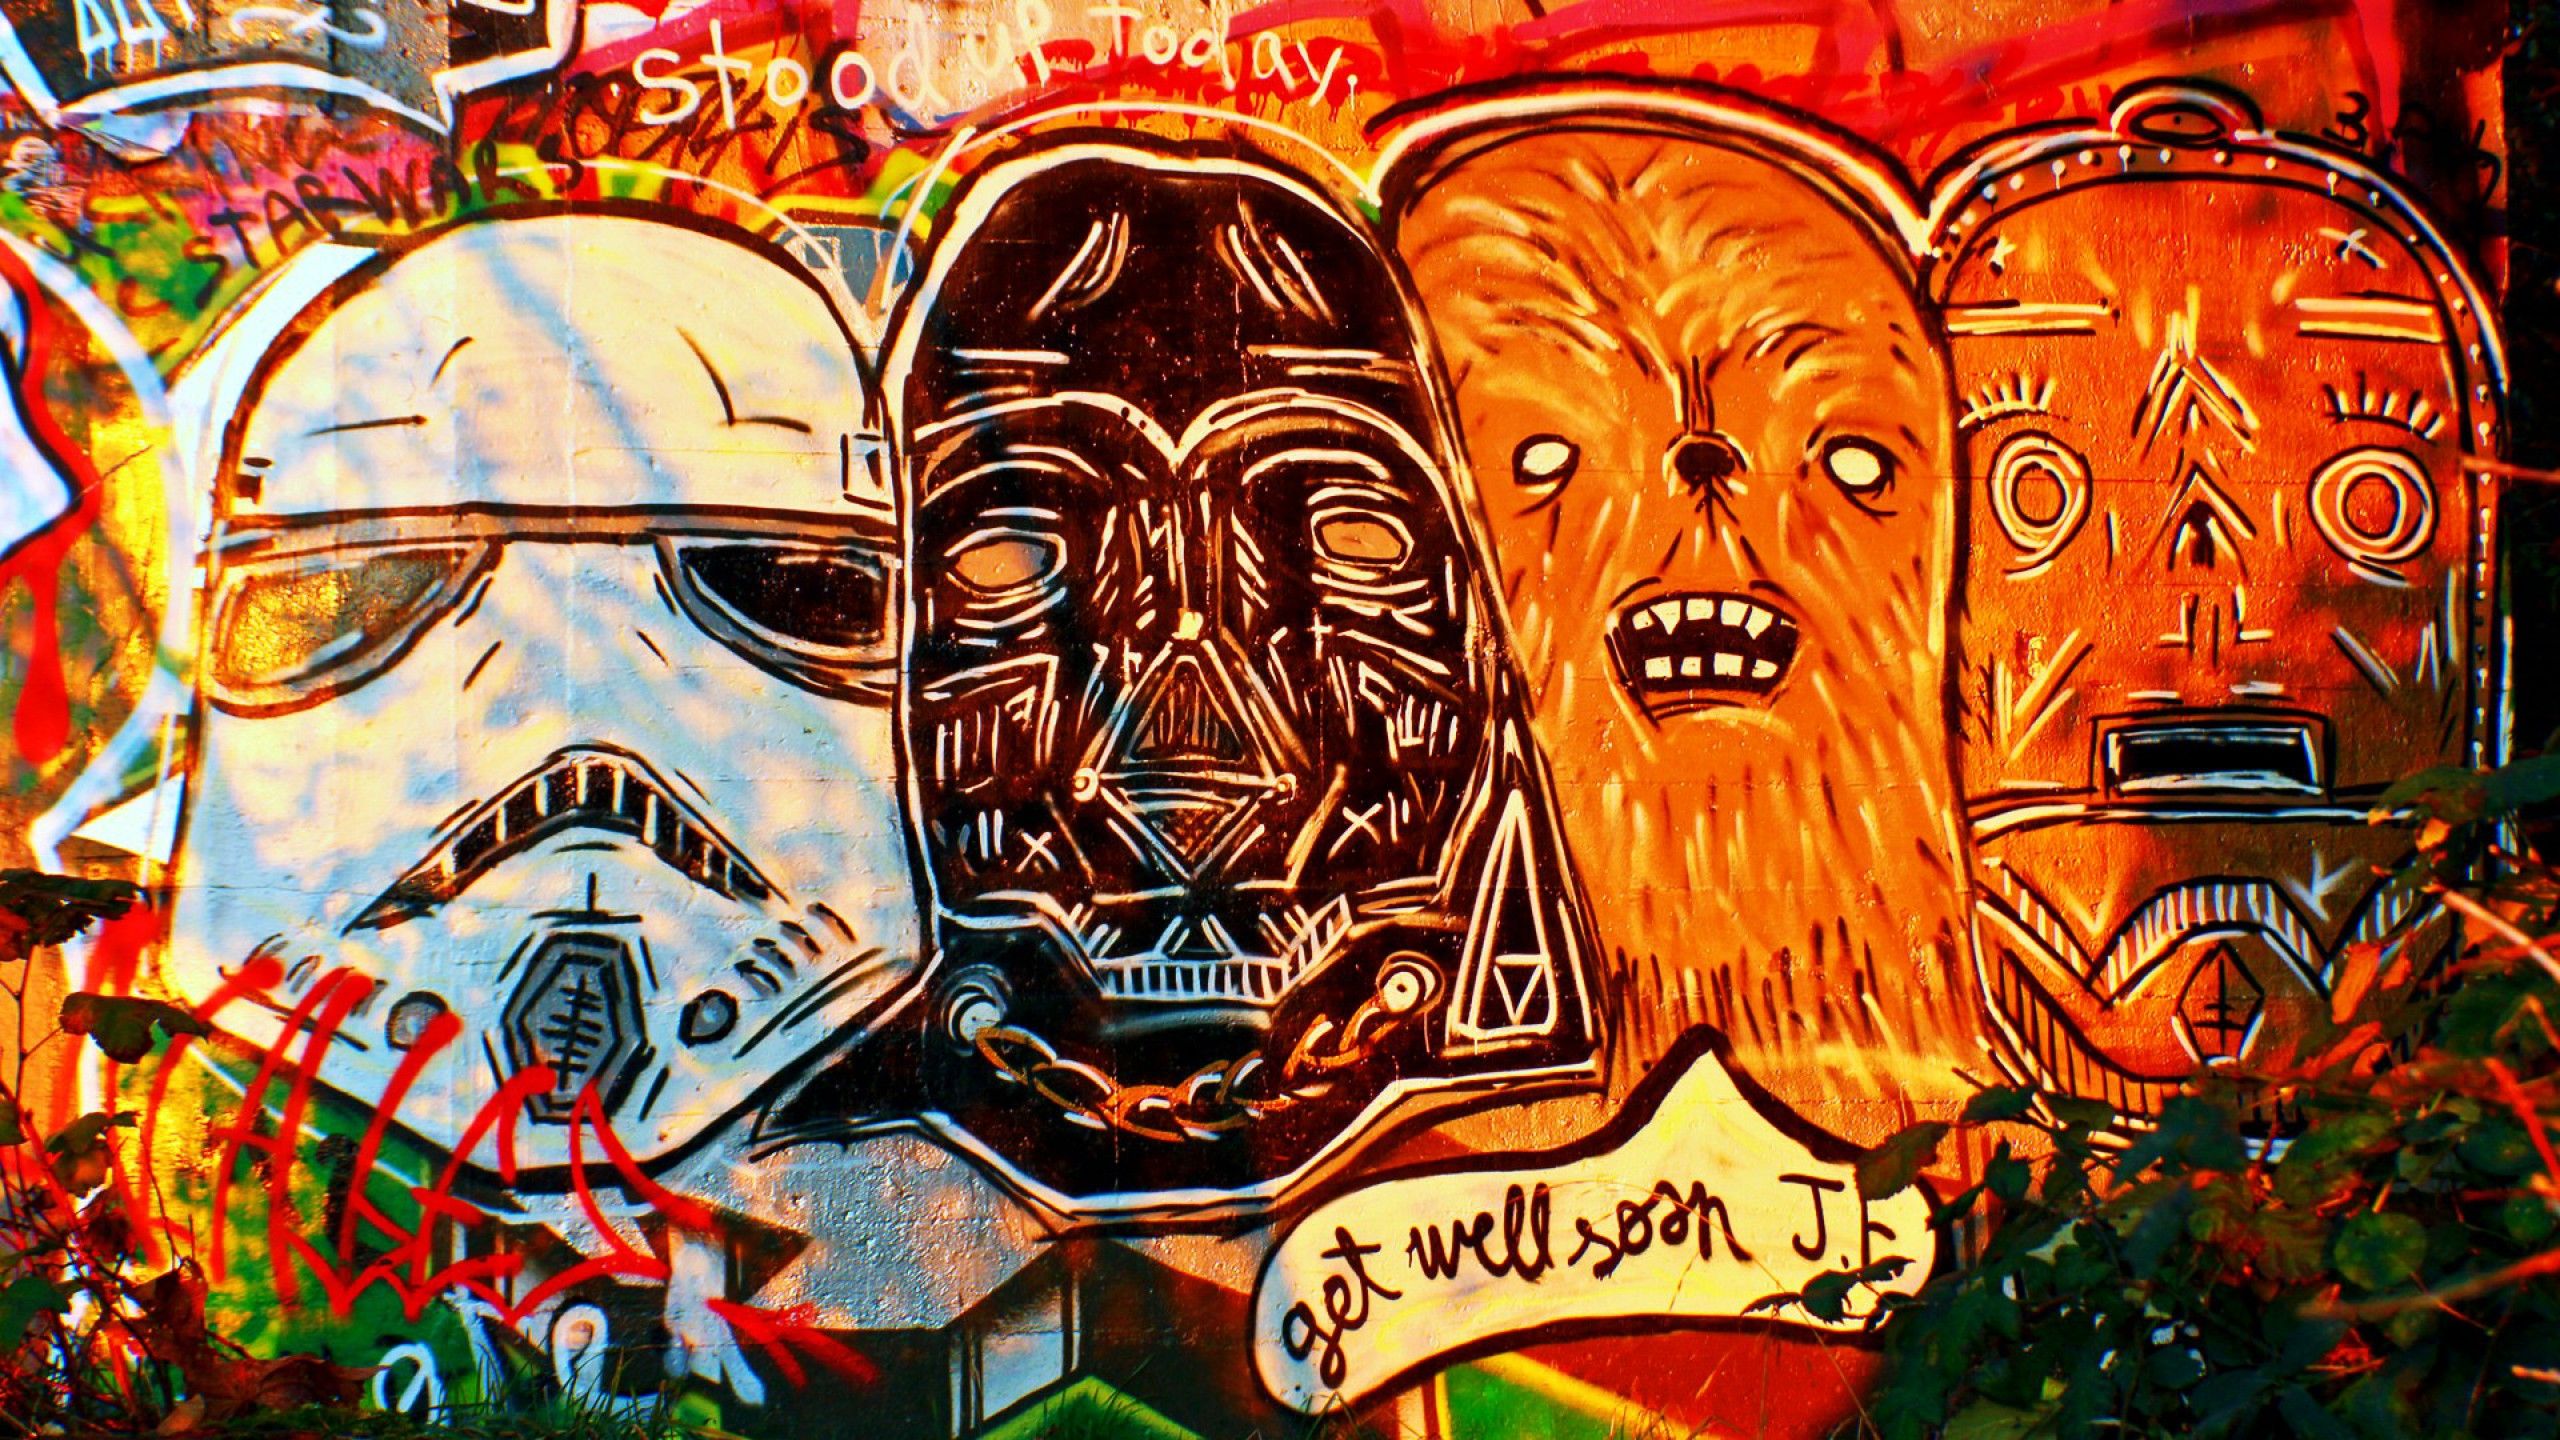 Star Wars Mural, canada, vancouver, 2560x1440 HD Wallpaper and other